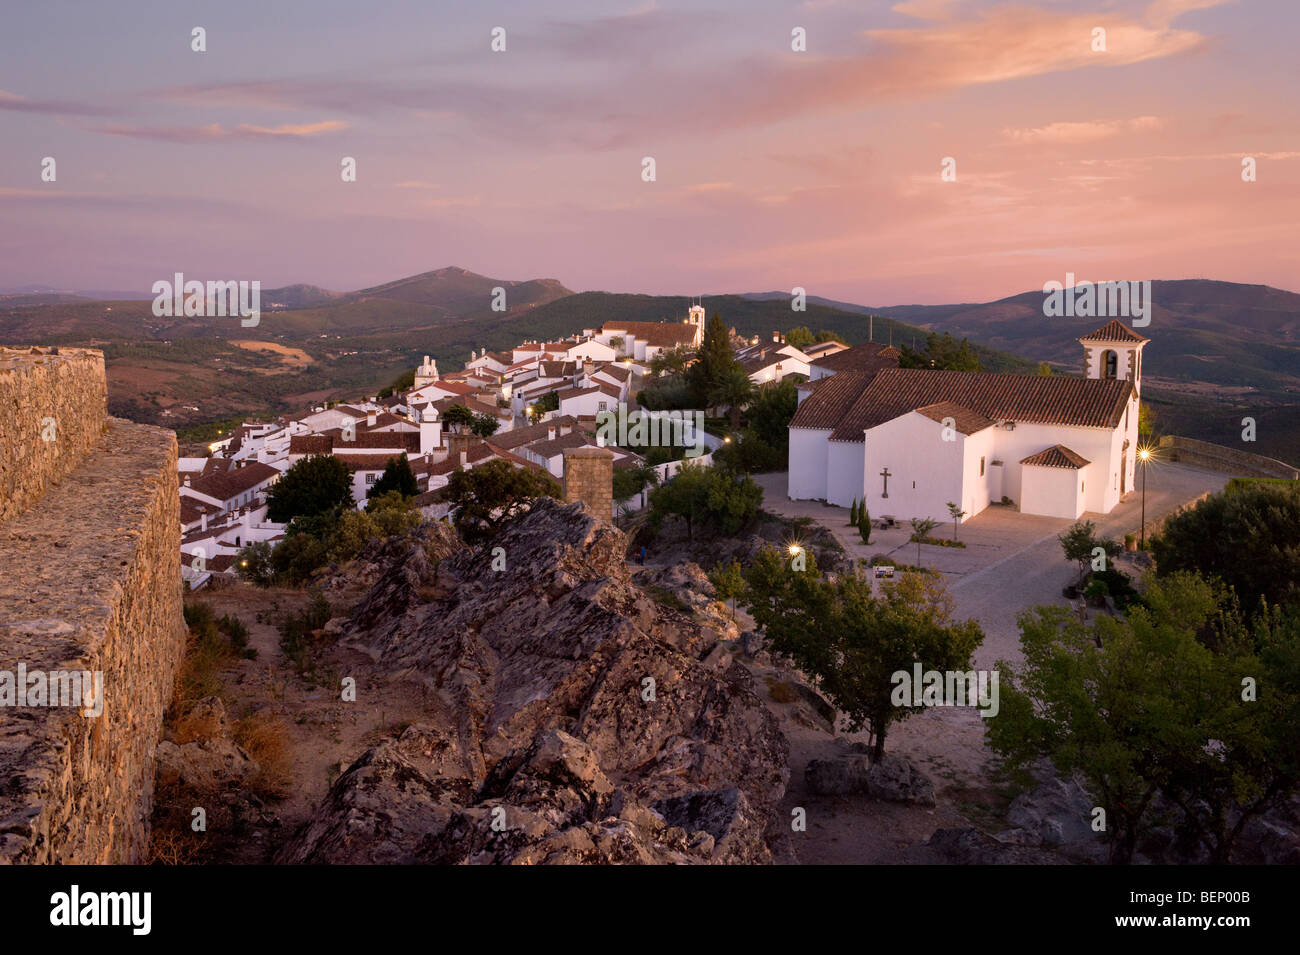 Portugal, the Alentejo, Marvao town at sunset Stock Photo